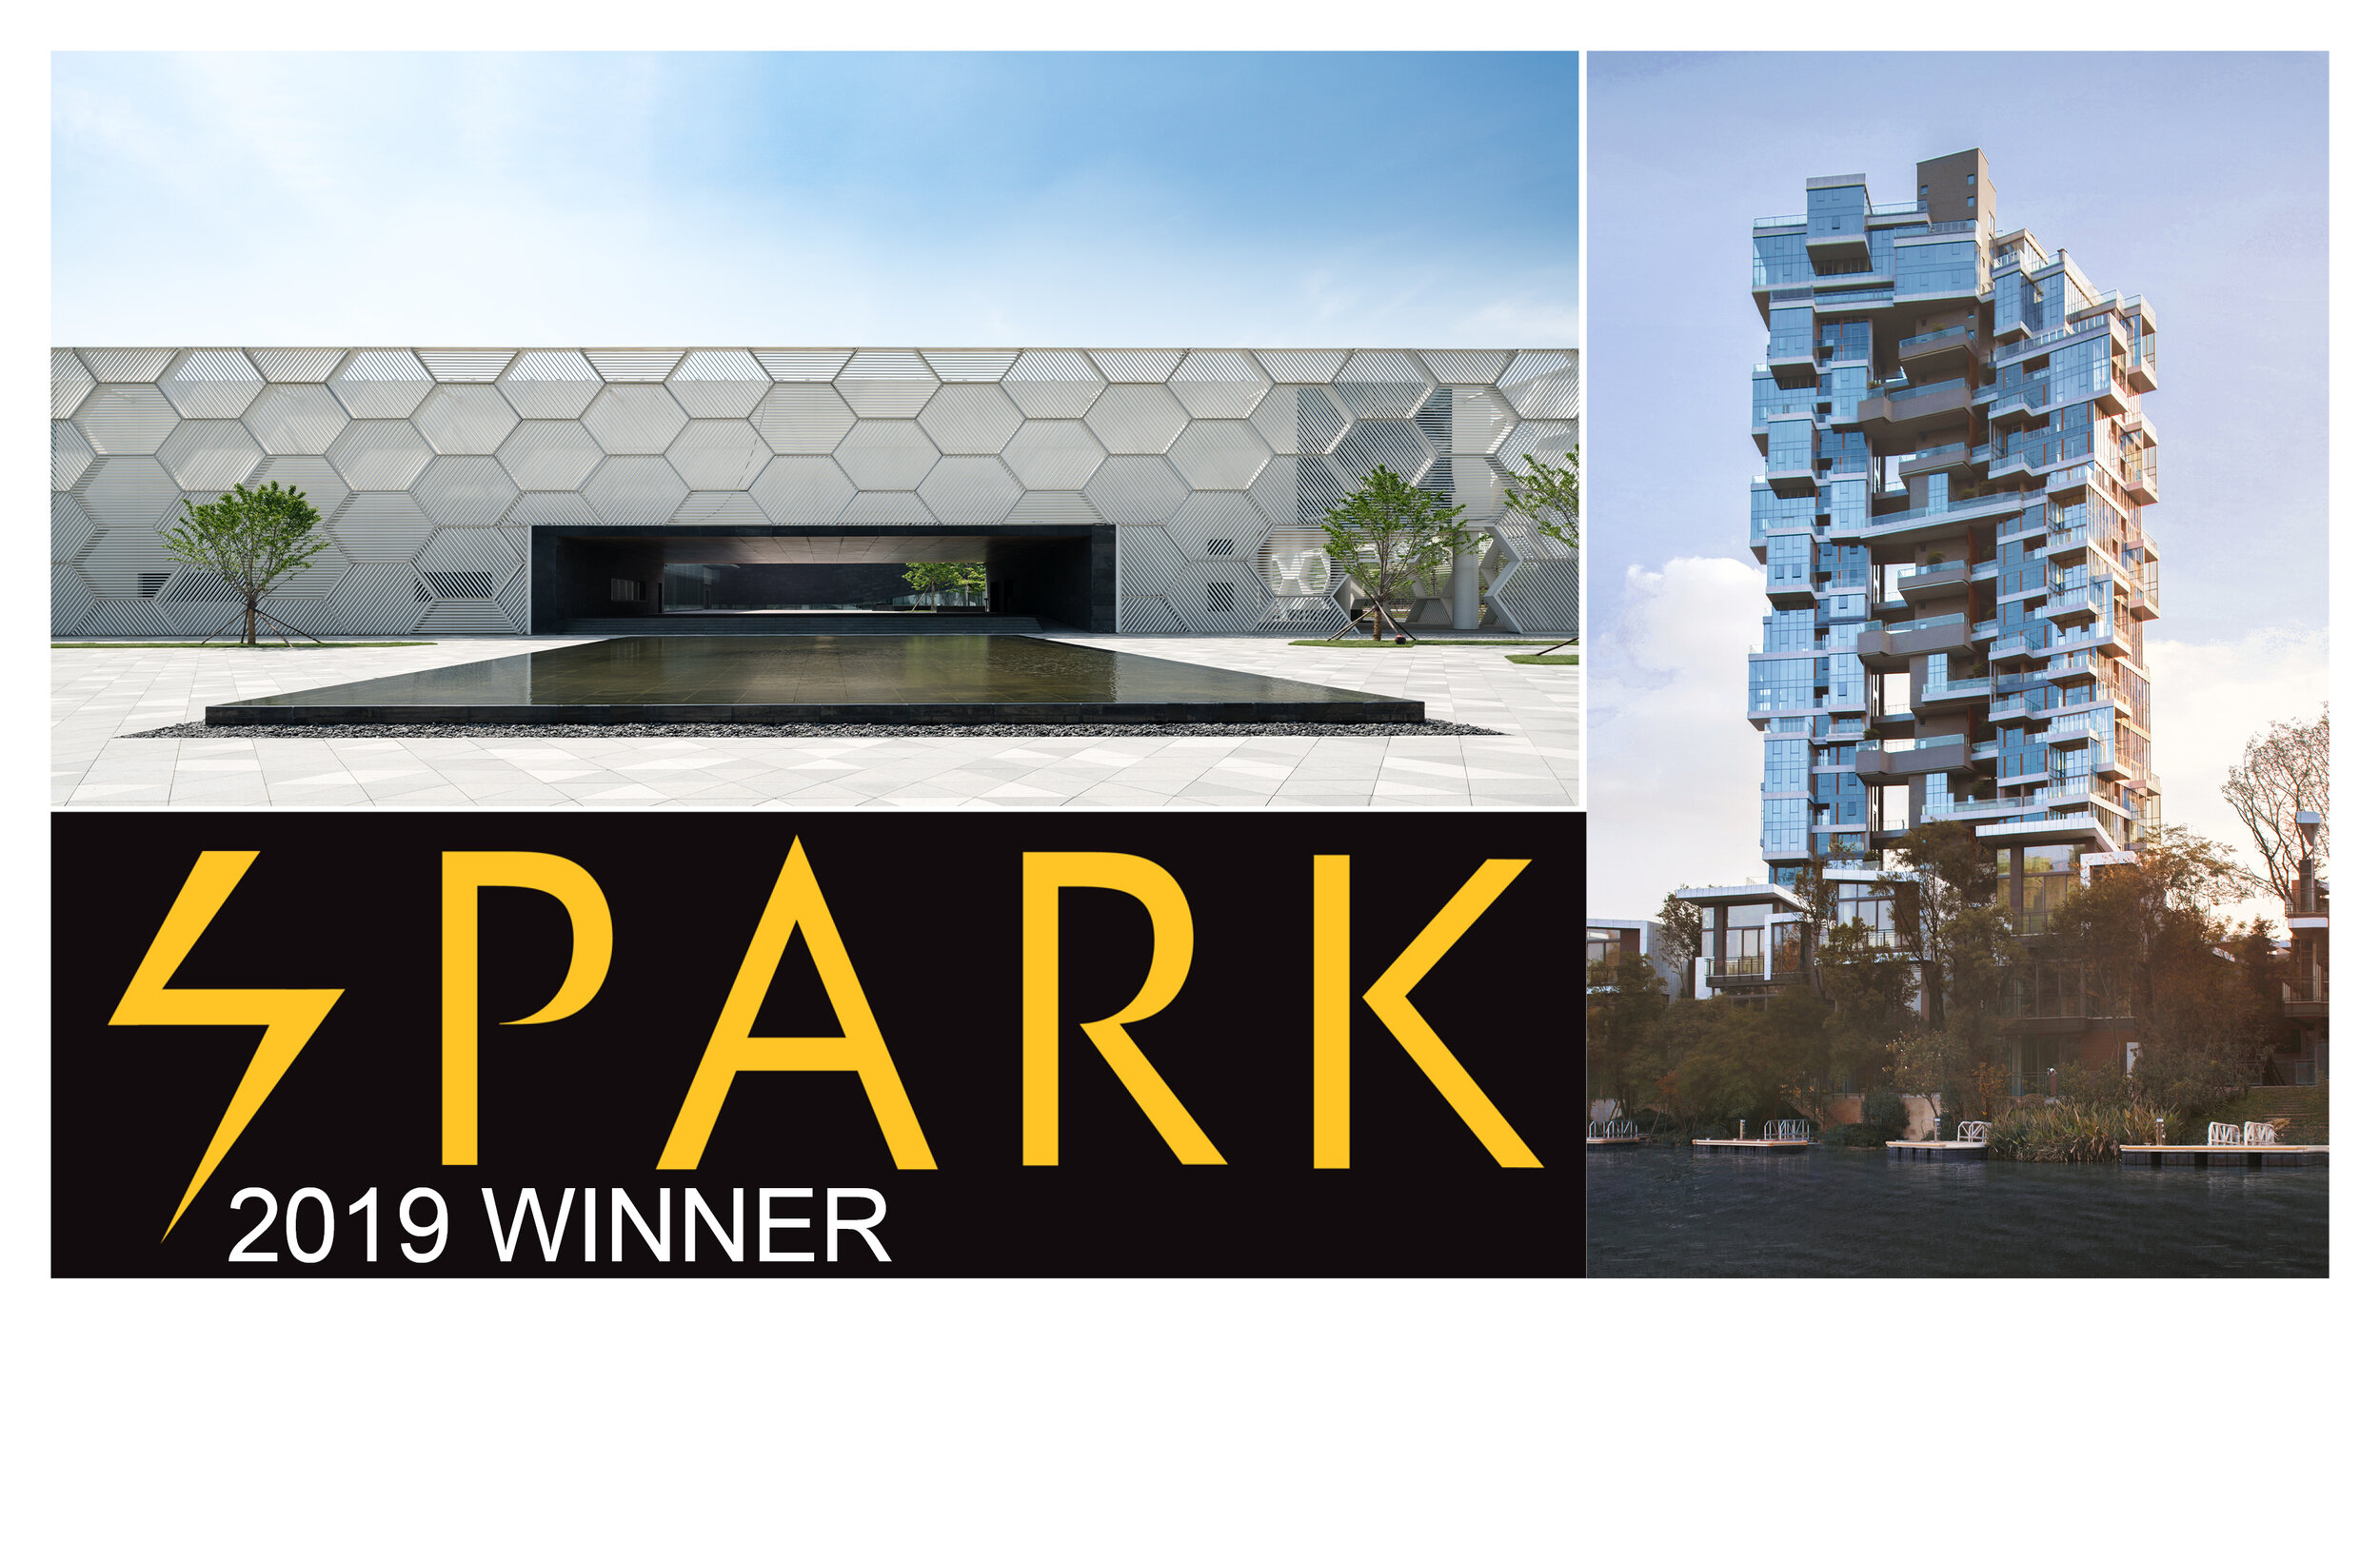 Two Projects Win at this Year's SPARK Awards